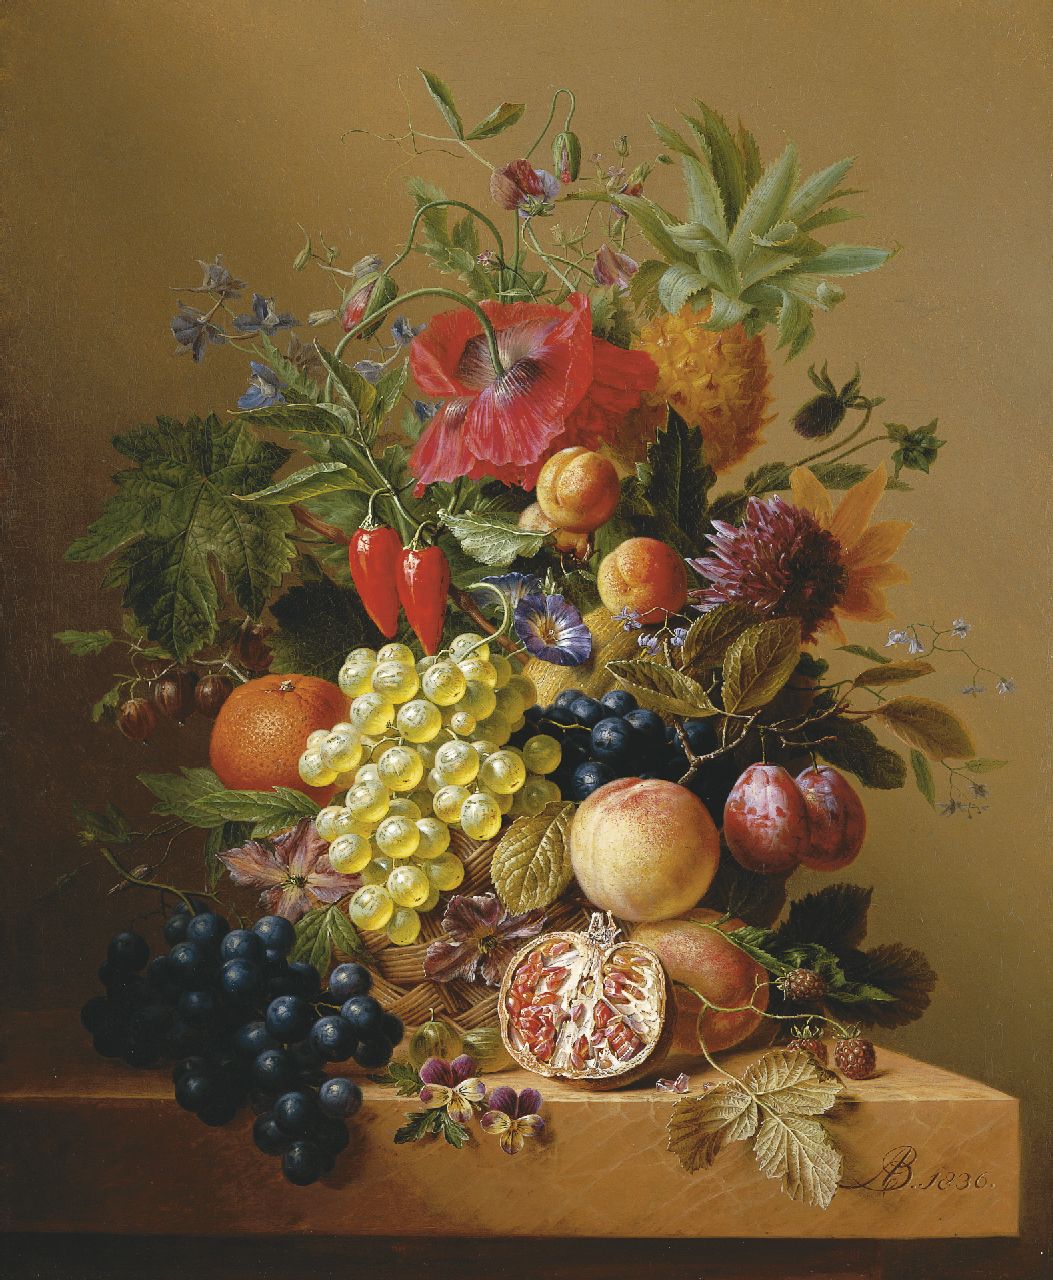 Bloemers A.  | Arnoldus Bloemers, A still life with vegetables, flowers and fruit, Öl auf Leinwand 65,0 x 54,0 cm, signed l.r. with monogram und dated 1836